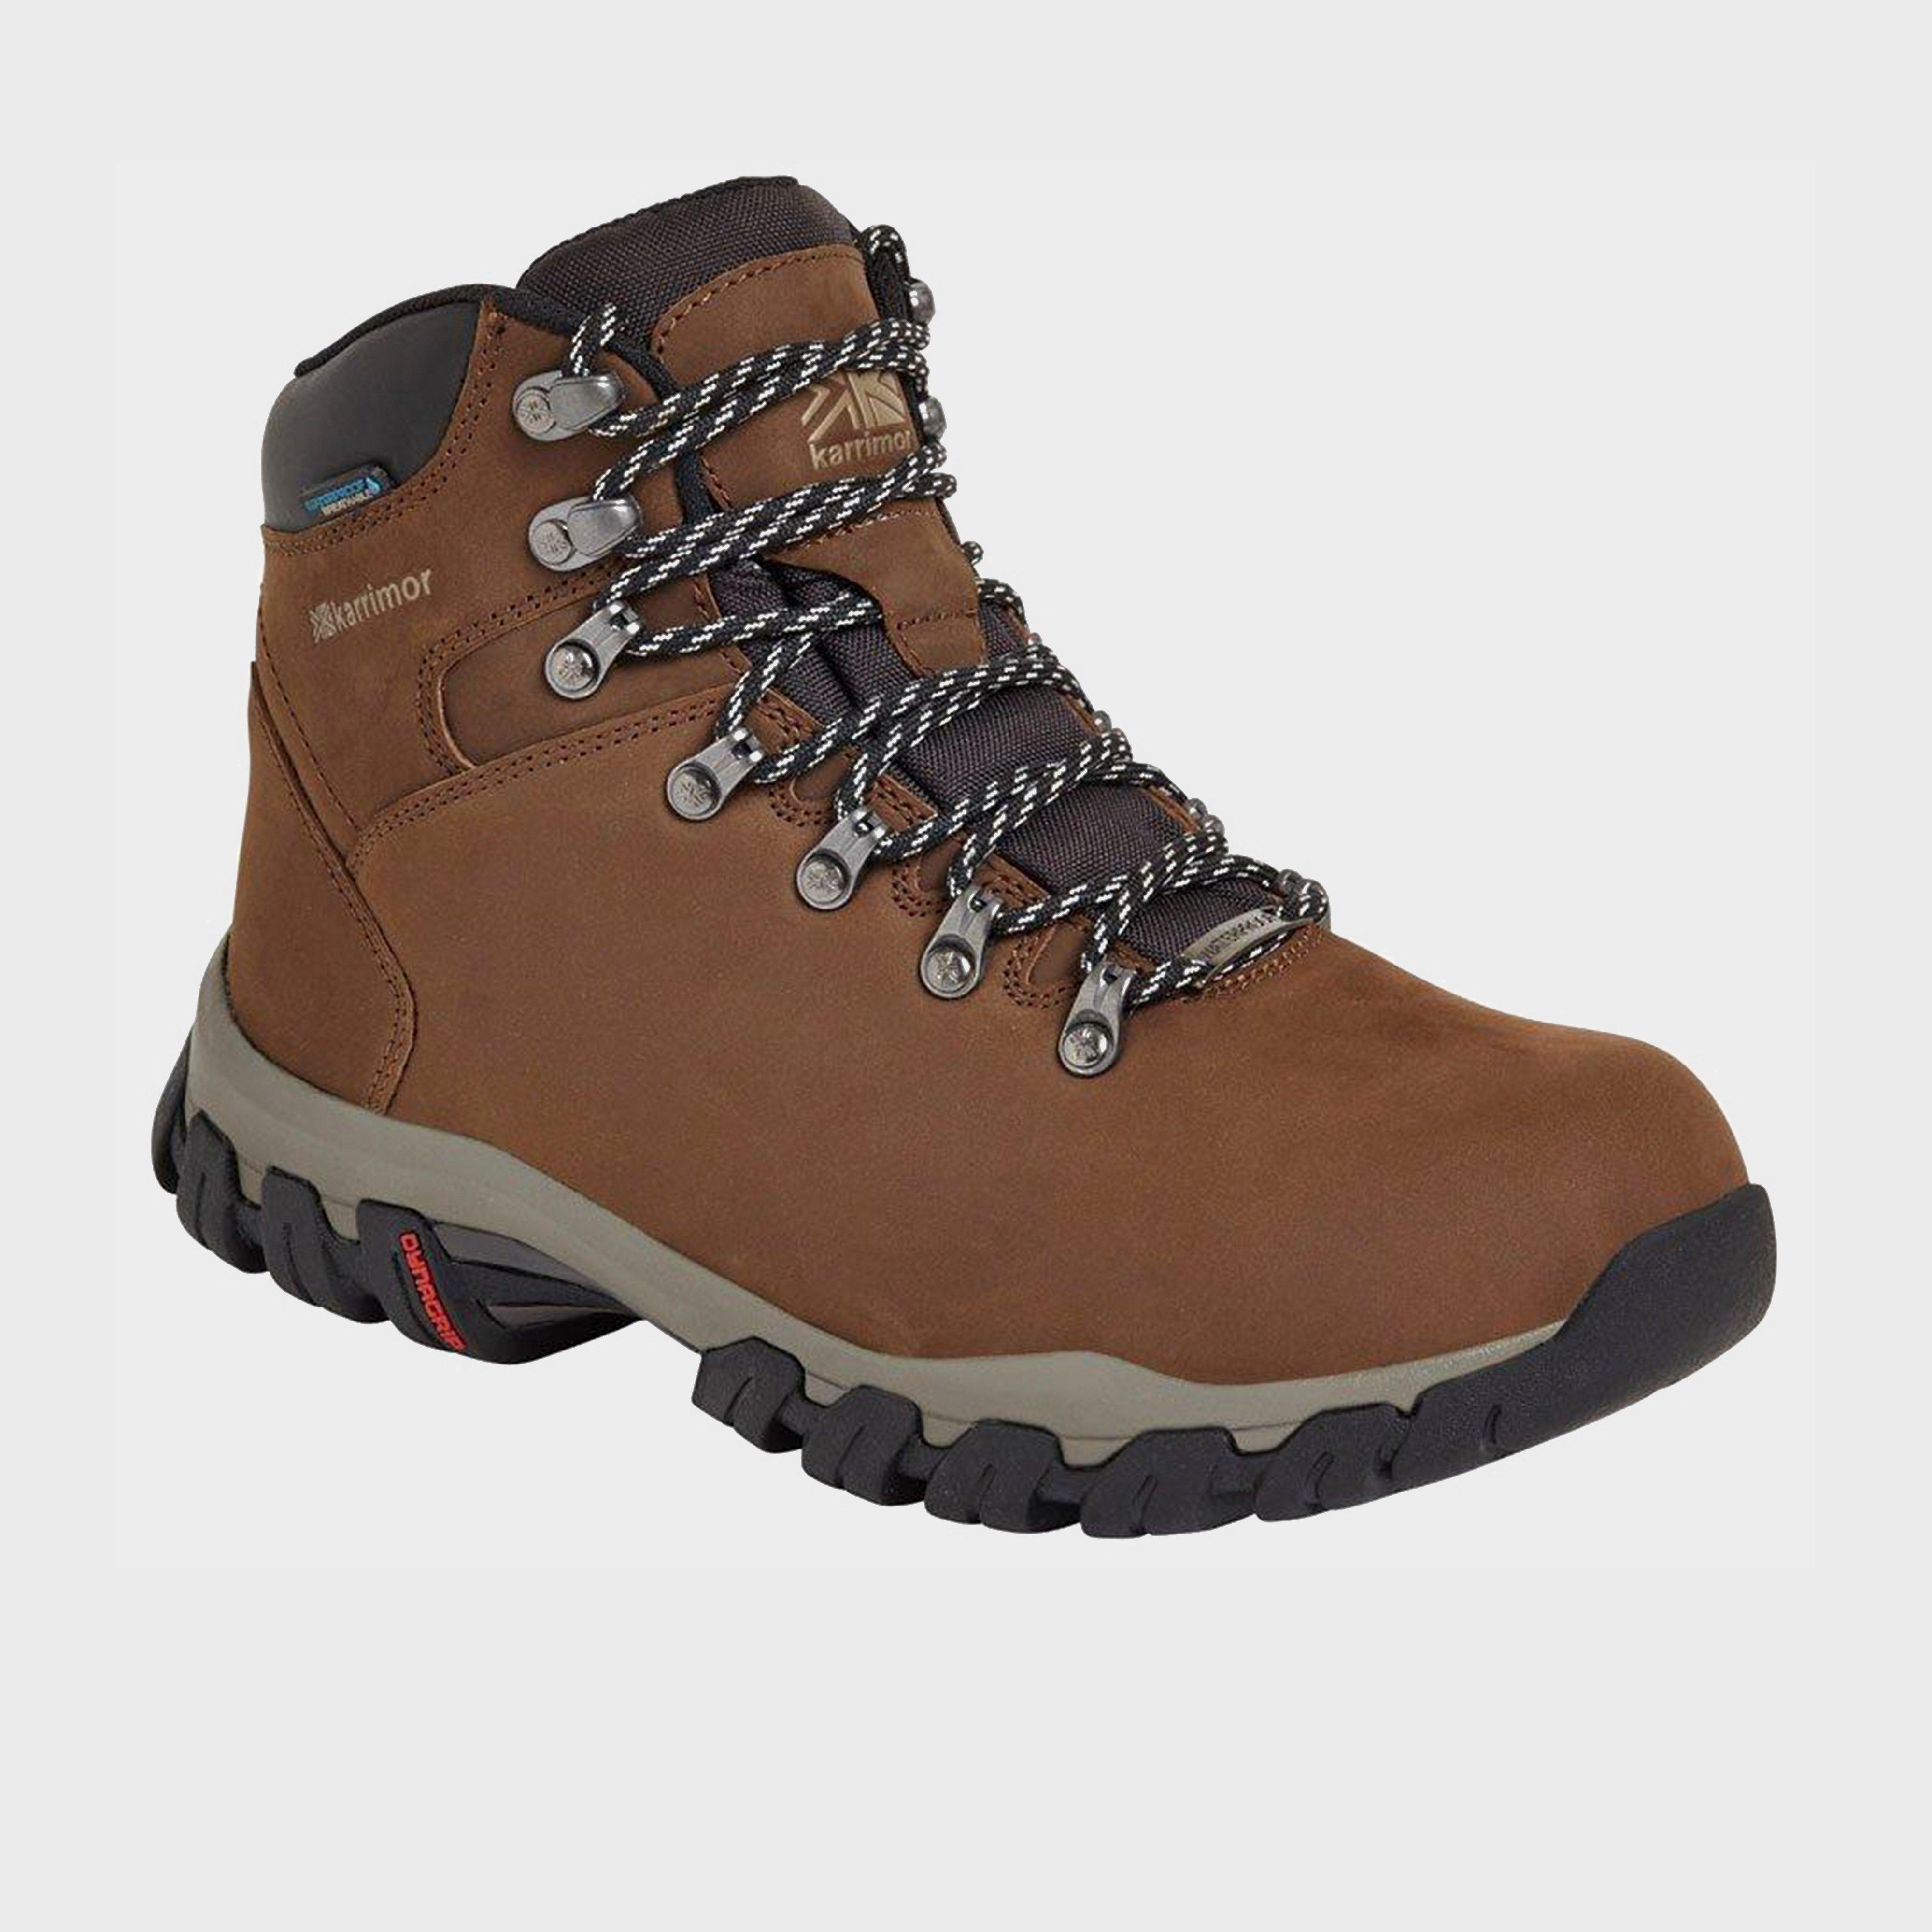 walking boots mens go outdoors